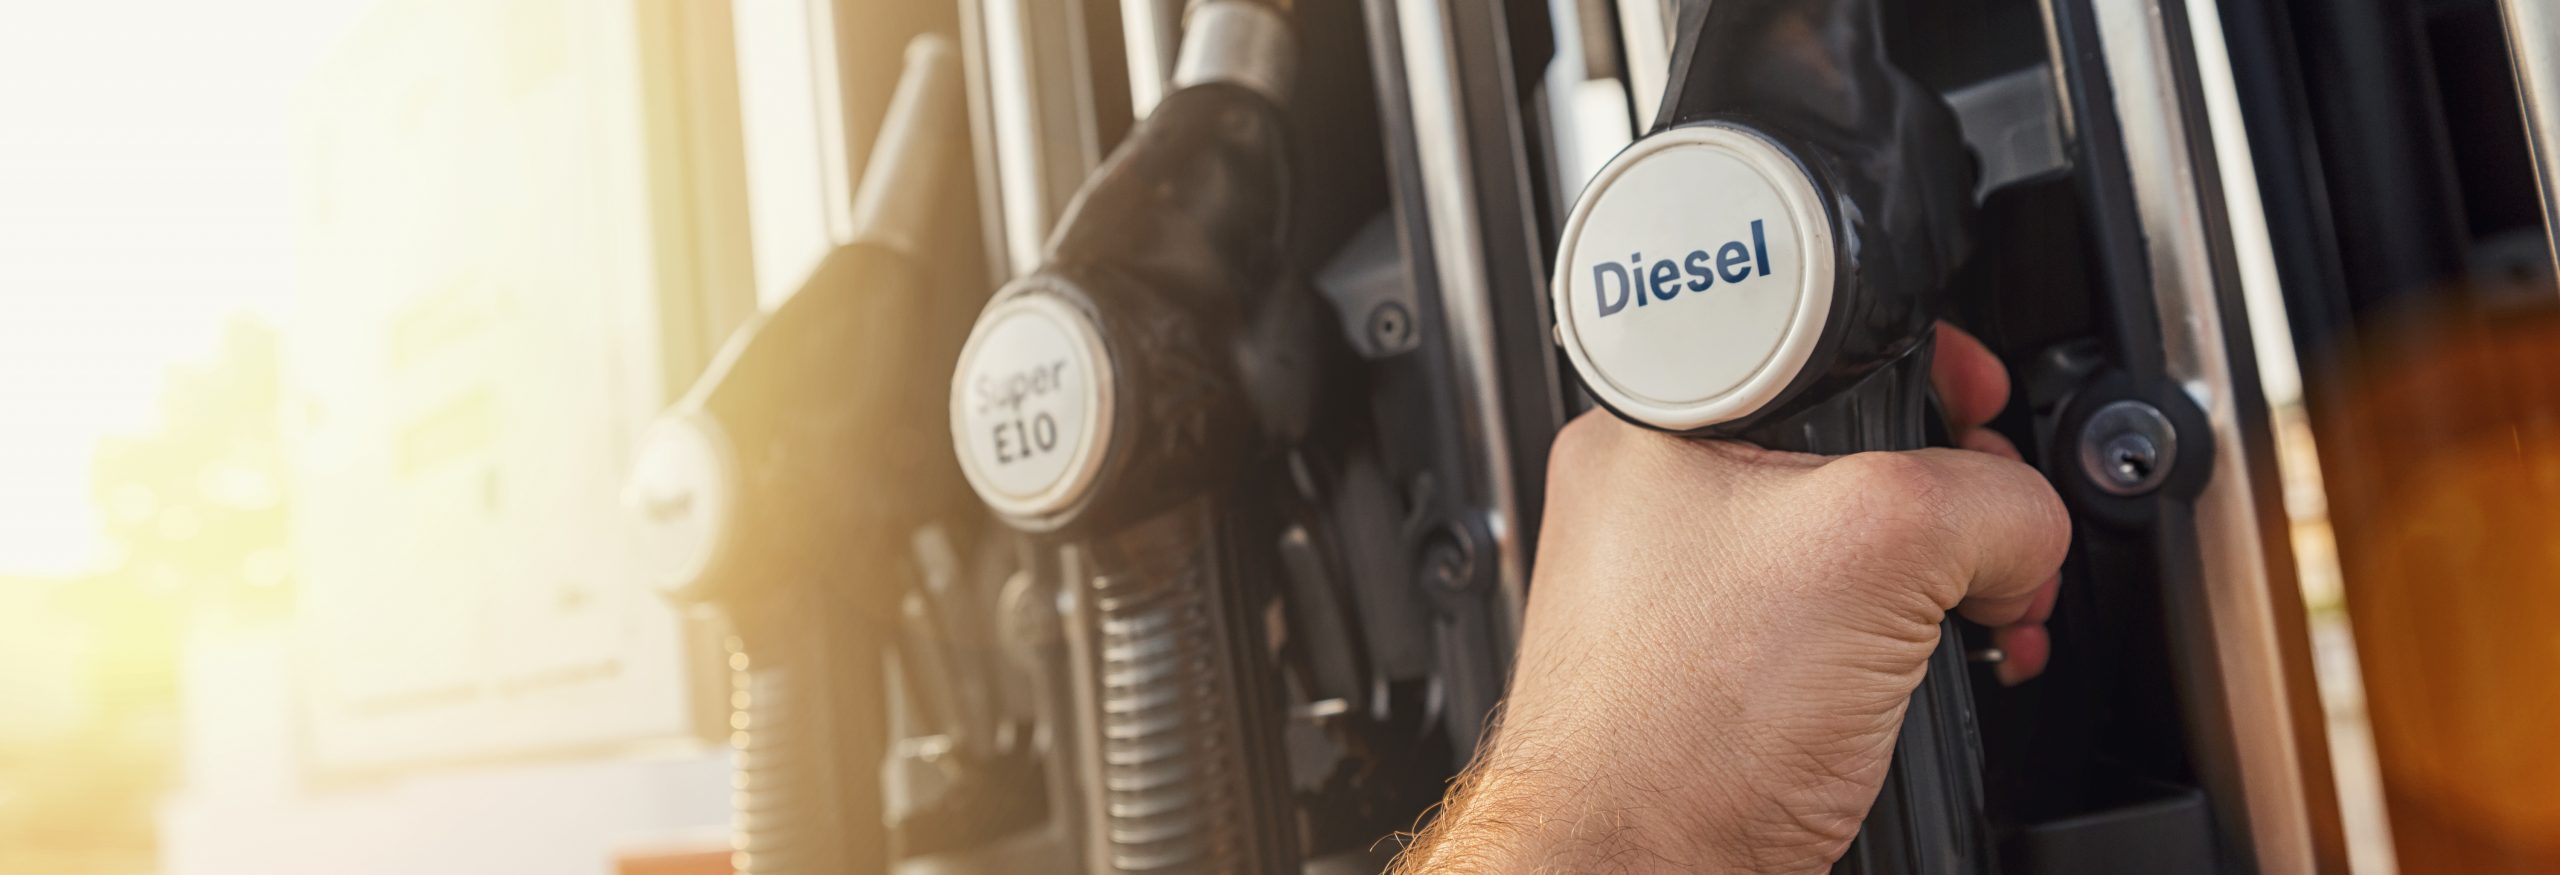 Diesel Prices Plunge as Slowing Economy Weighs on Energy Markets